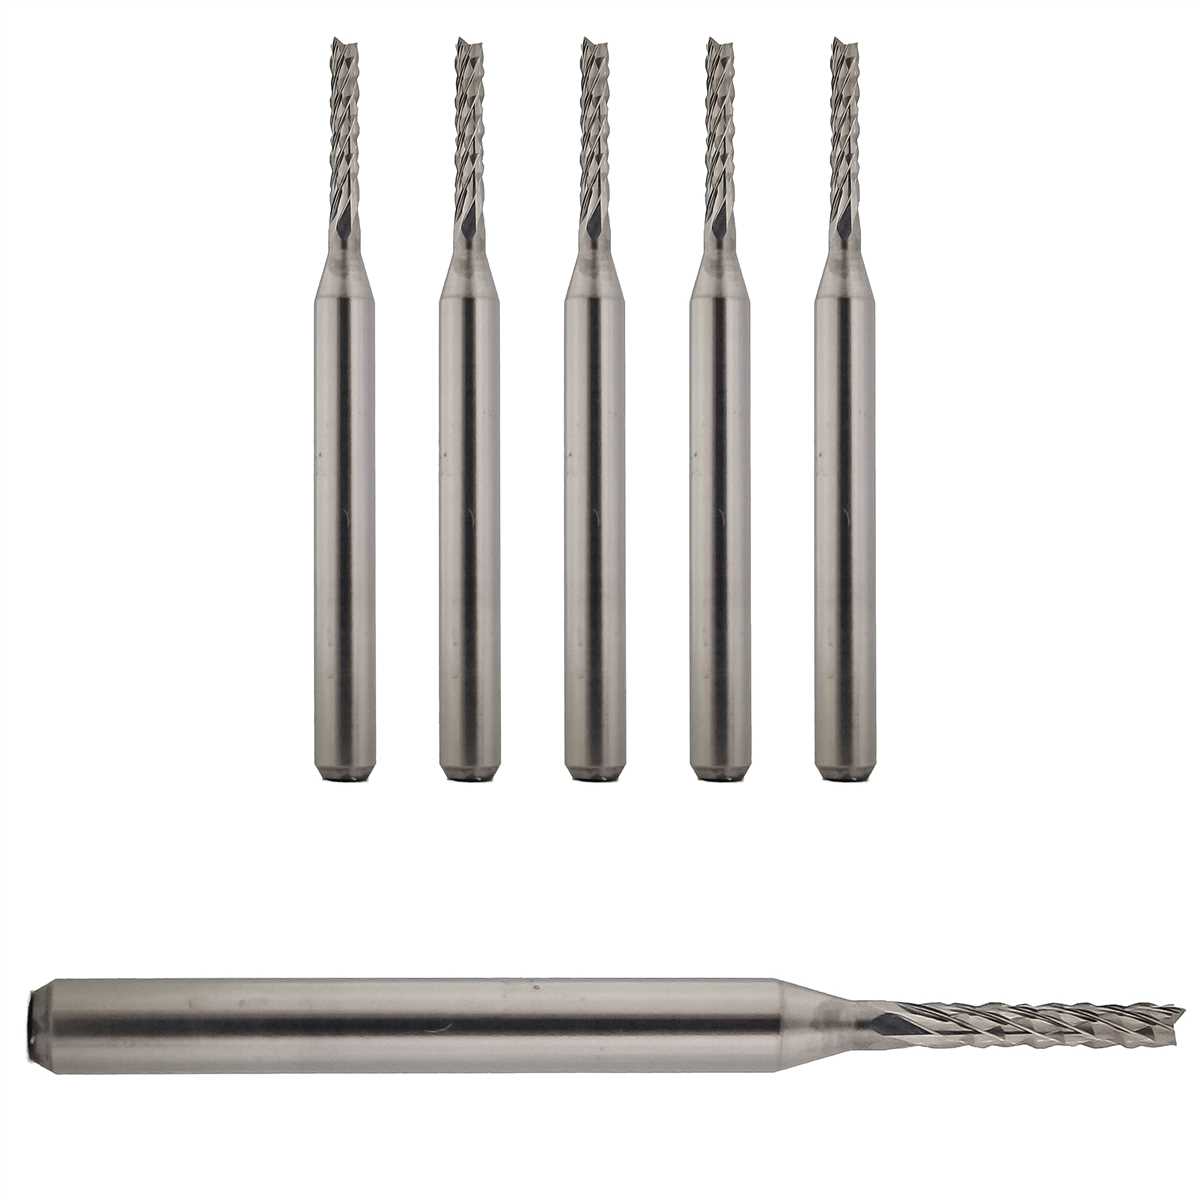 Material Selection for Drill Bits